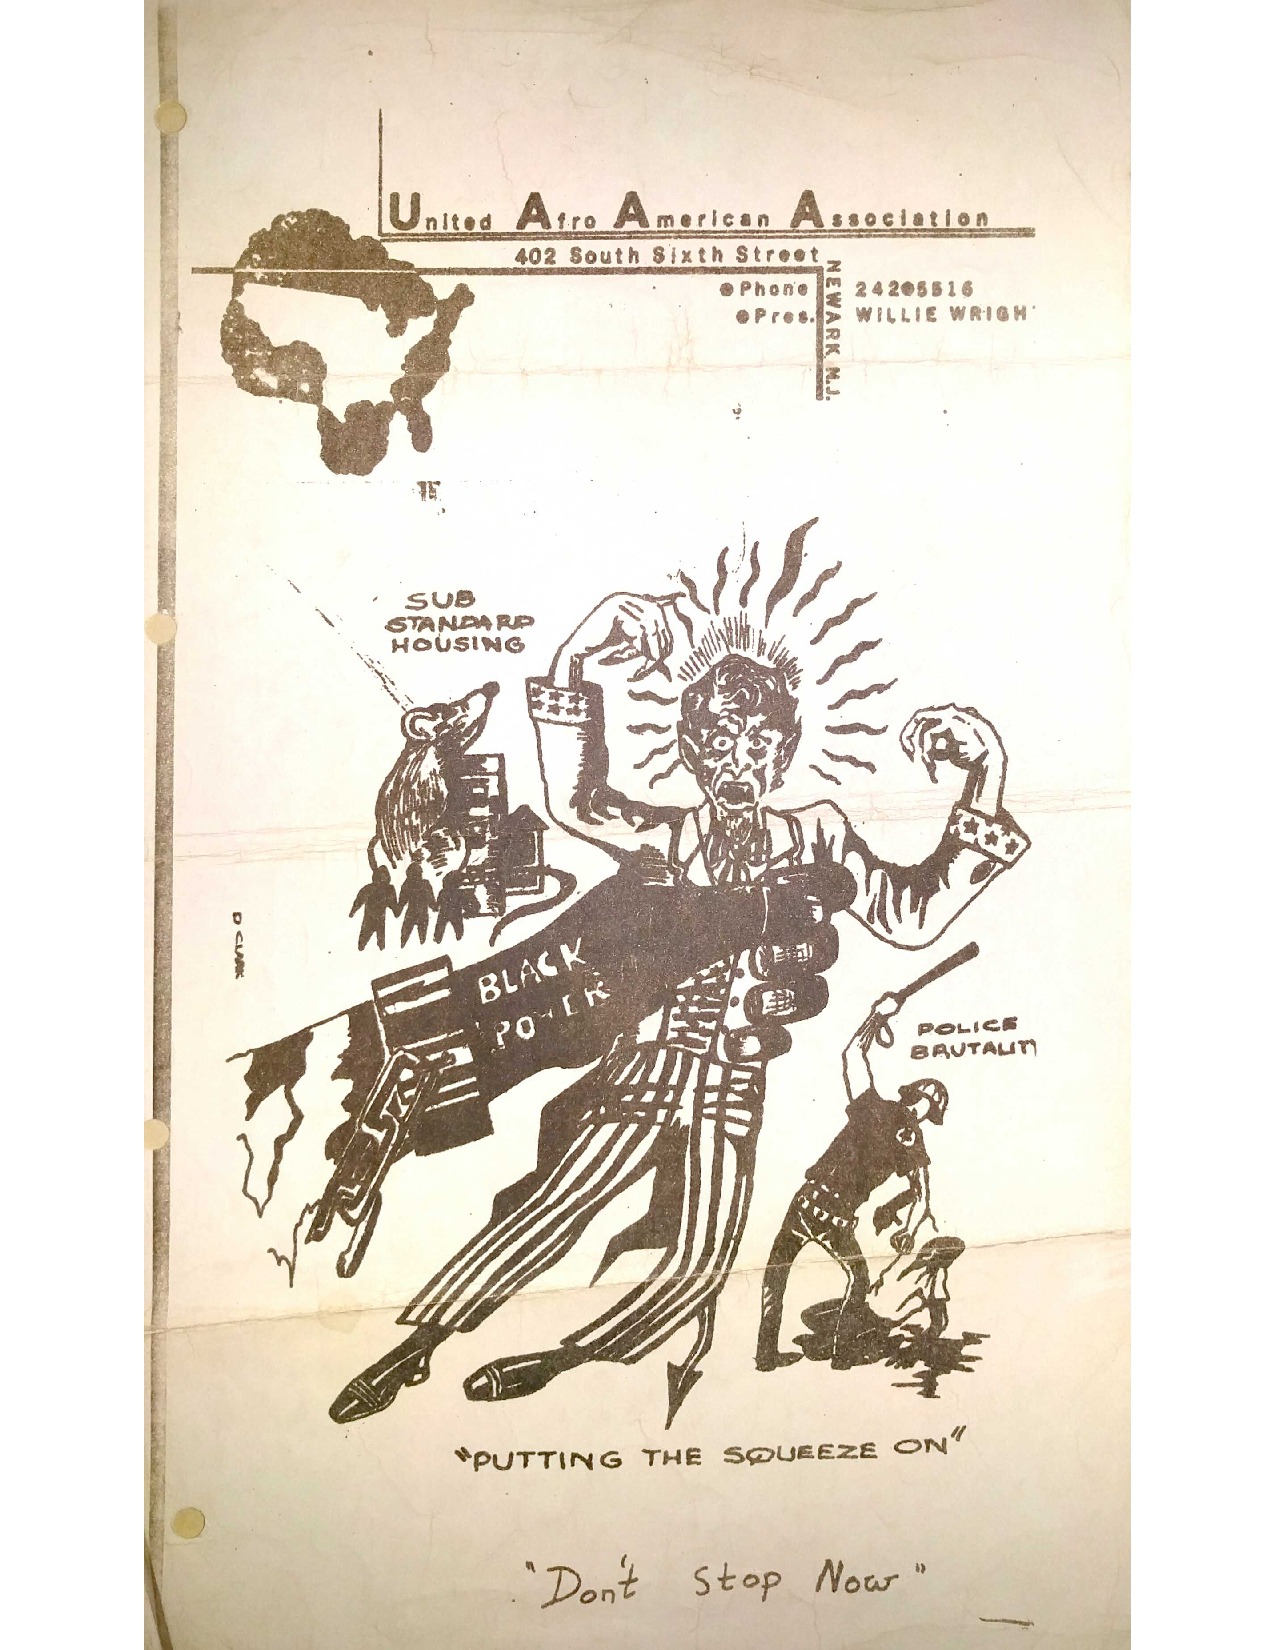 United Afro American Association Poster (1967)